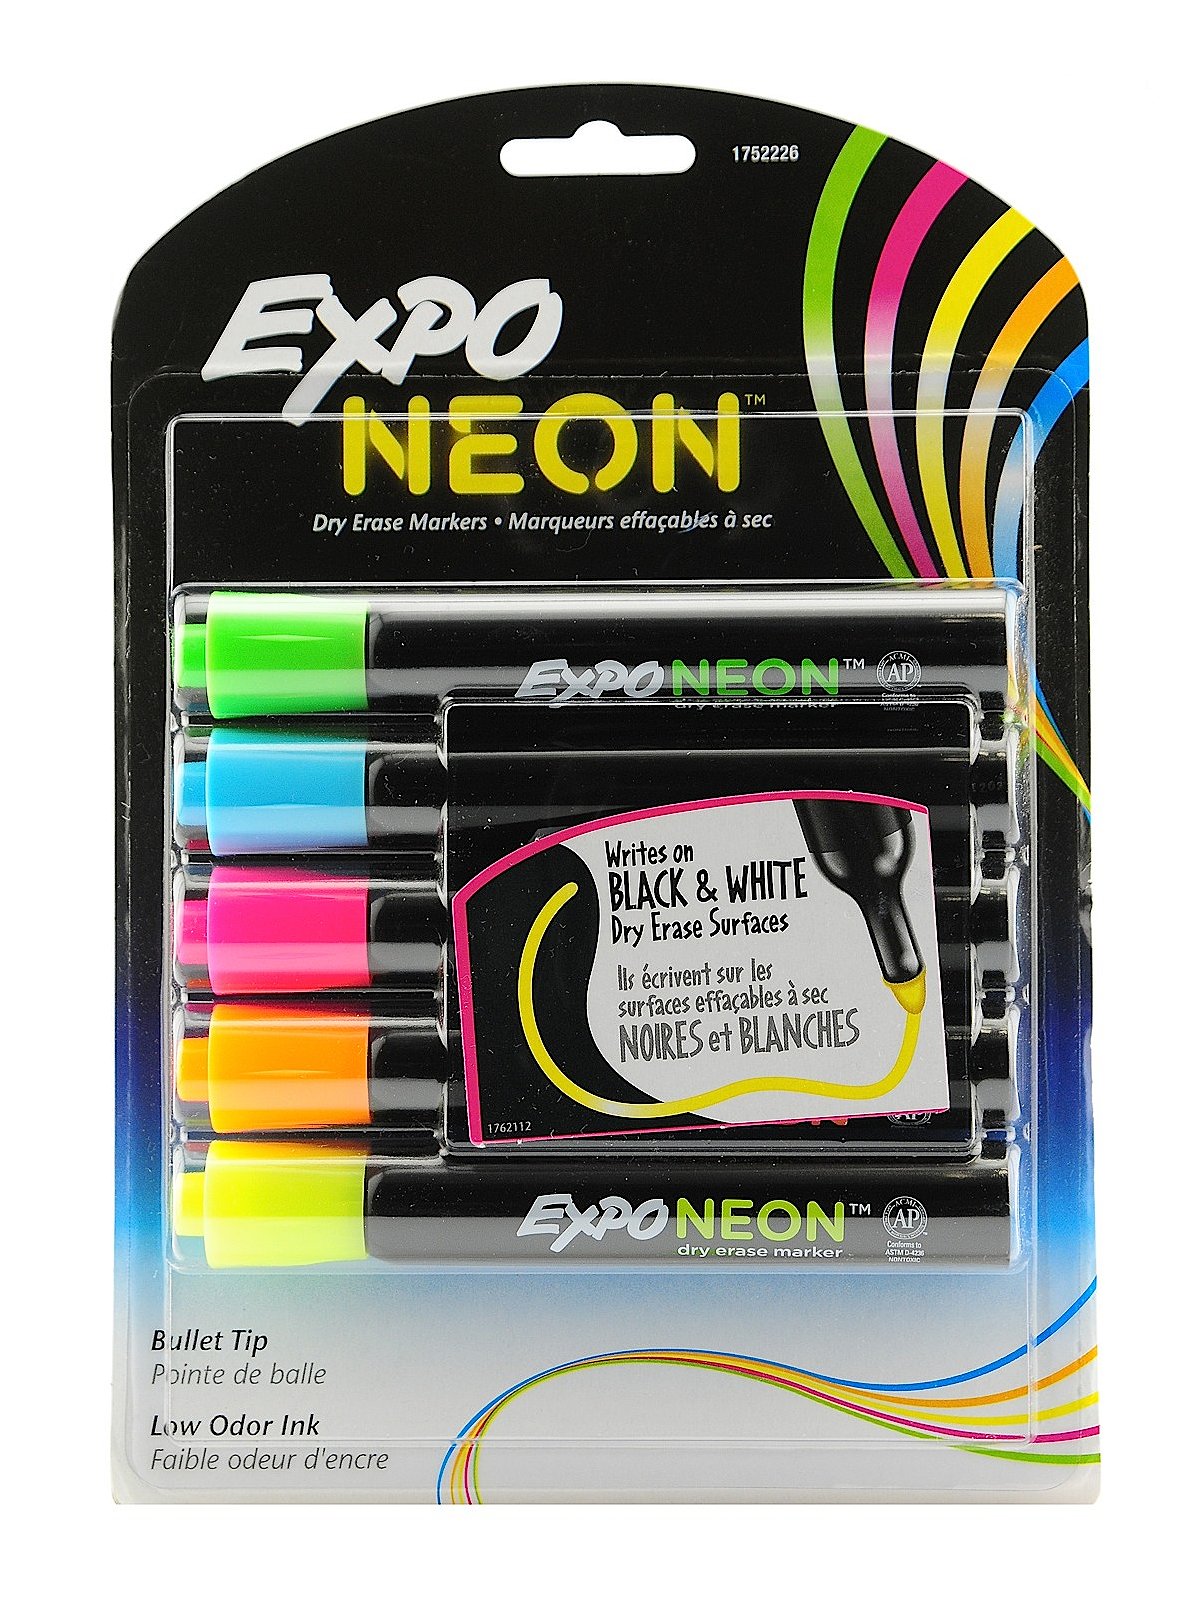 Expo Glow in the dark markers - Marketing Project 